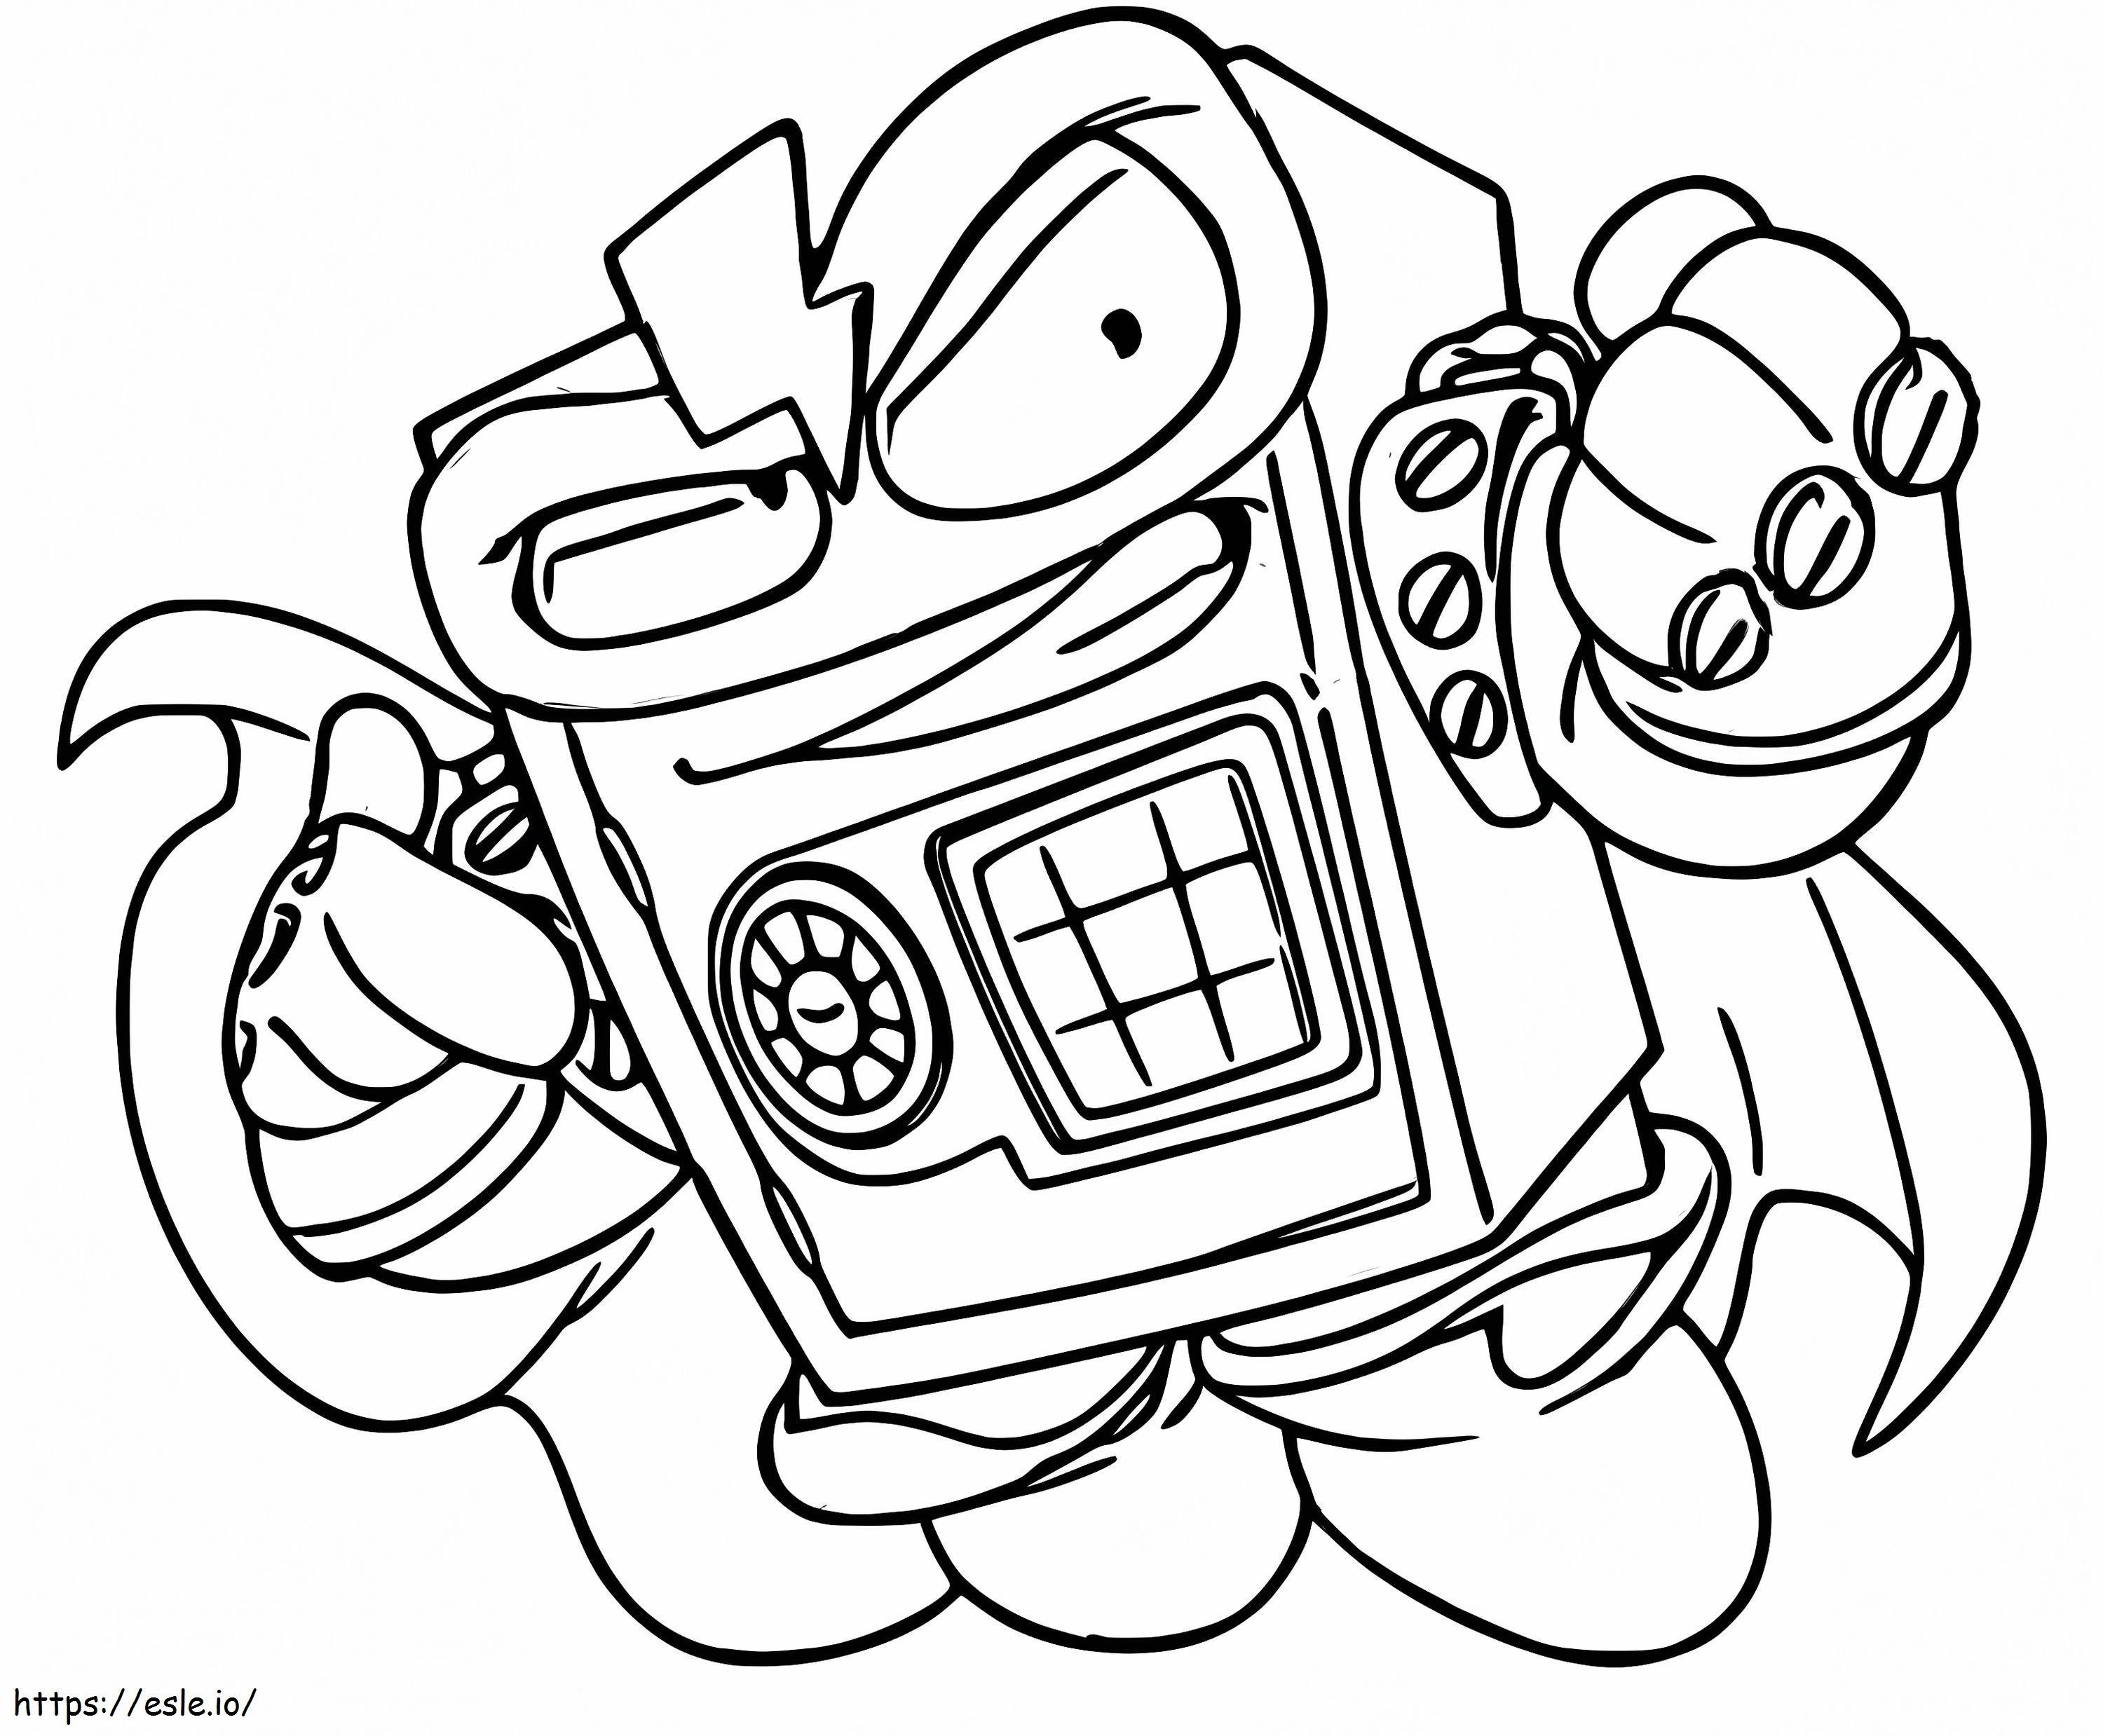 Hardlock Superzings coloring page